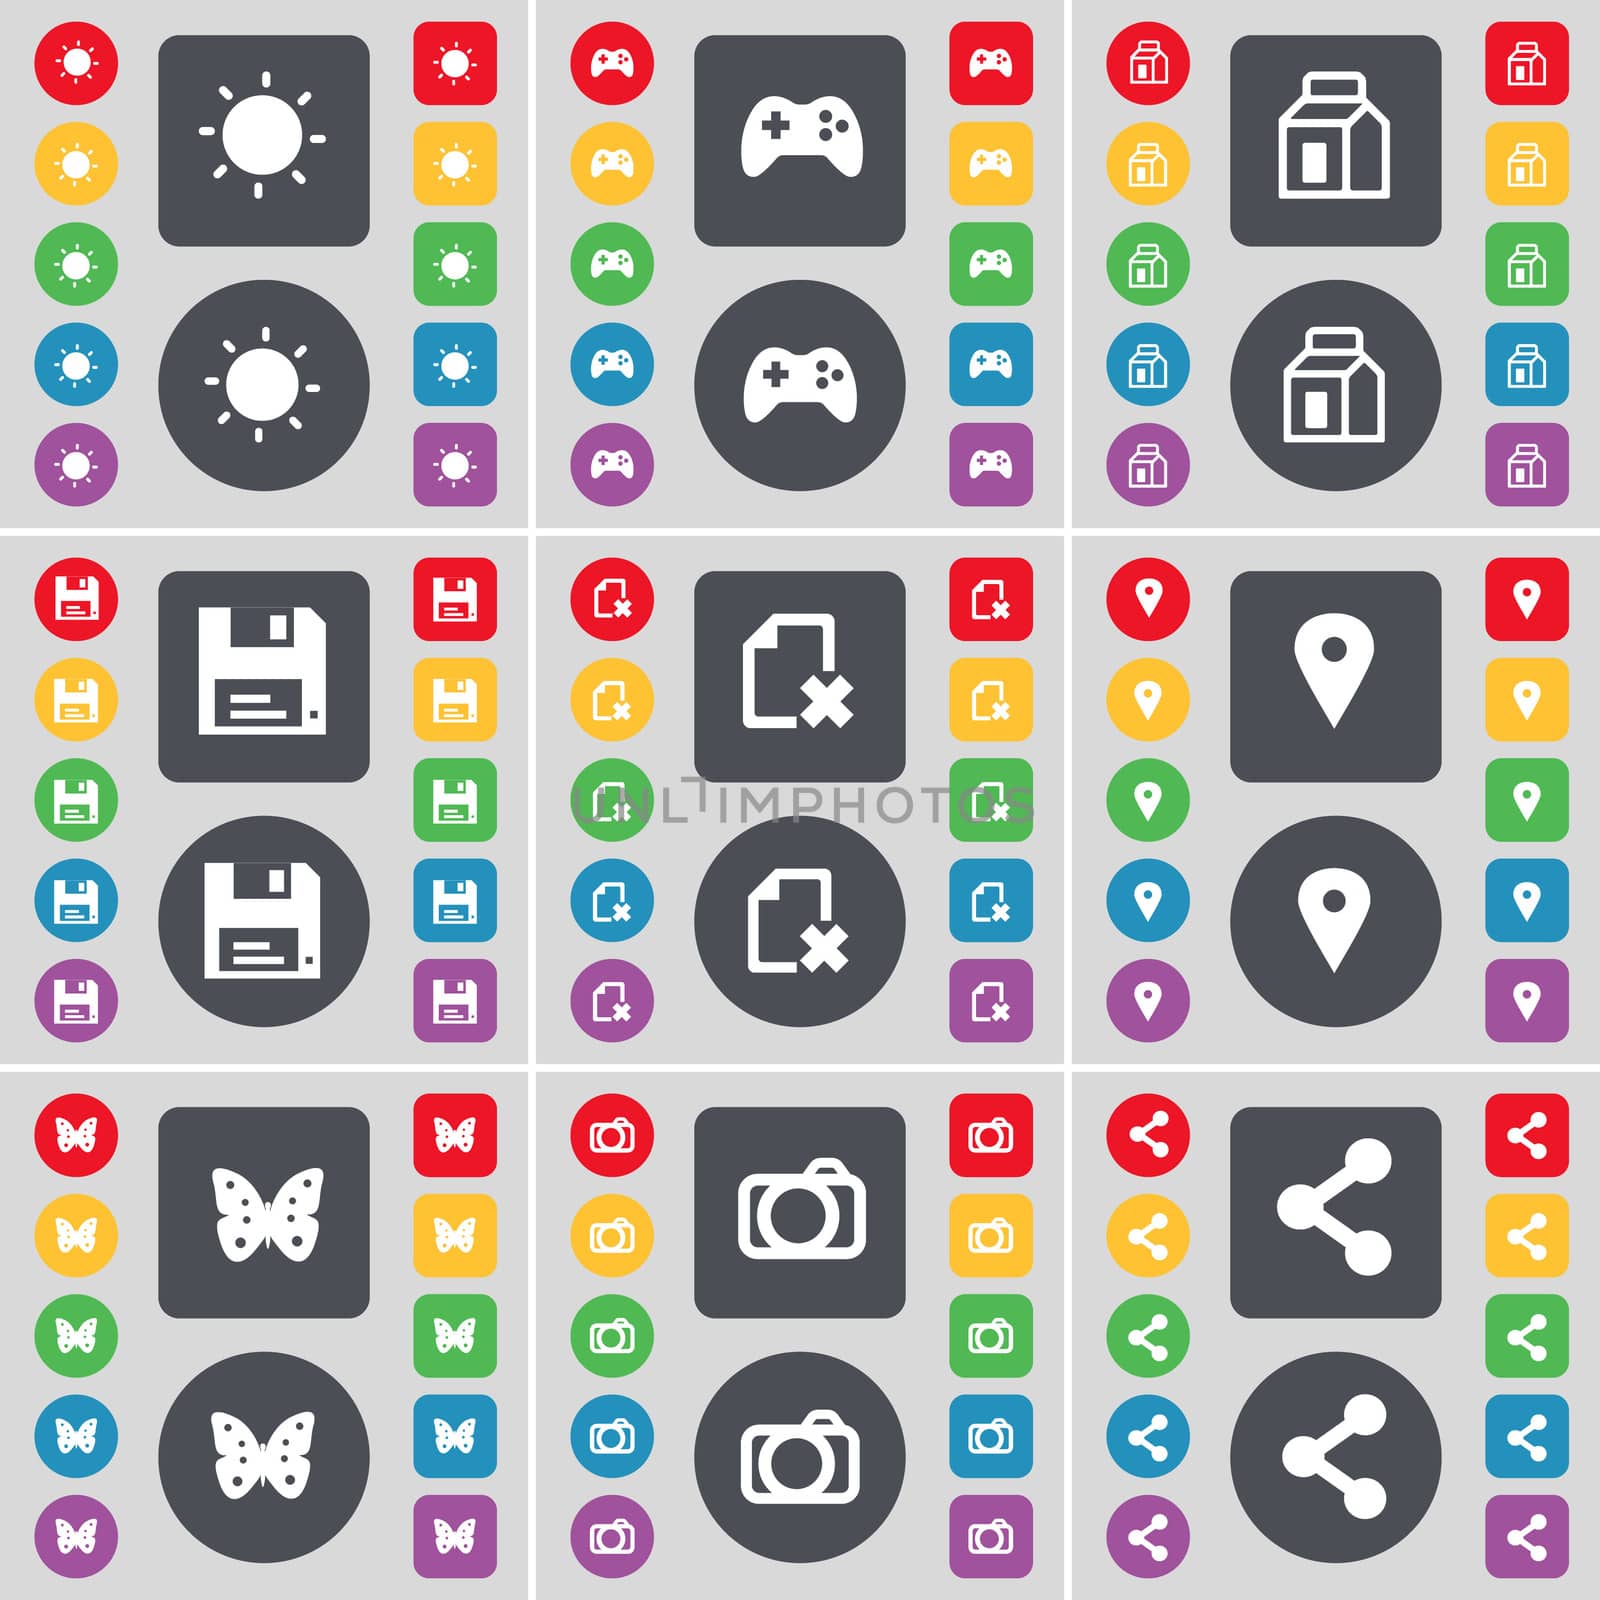 Light, Gamepad, Packing, Floppy, File, Checkpoint, Butterfly, Camera, Share icon symbol. A large set of flat, colored buttons for your design. illustration